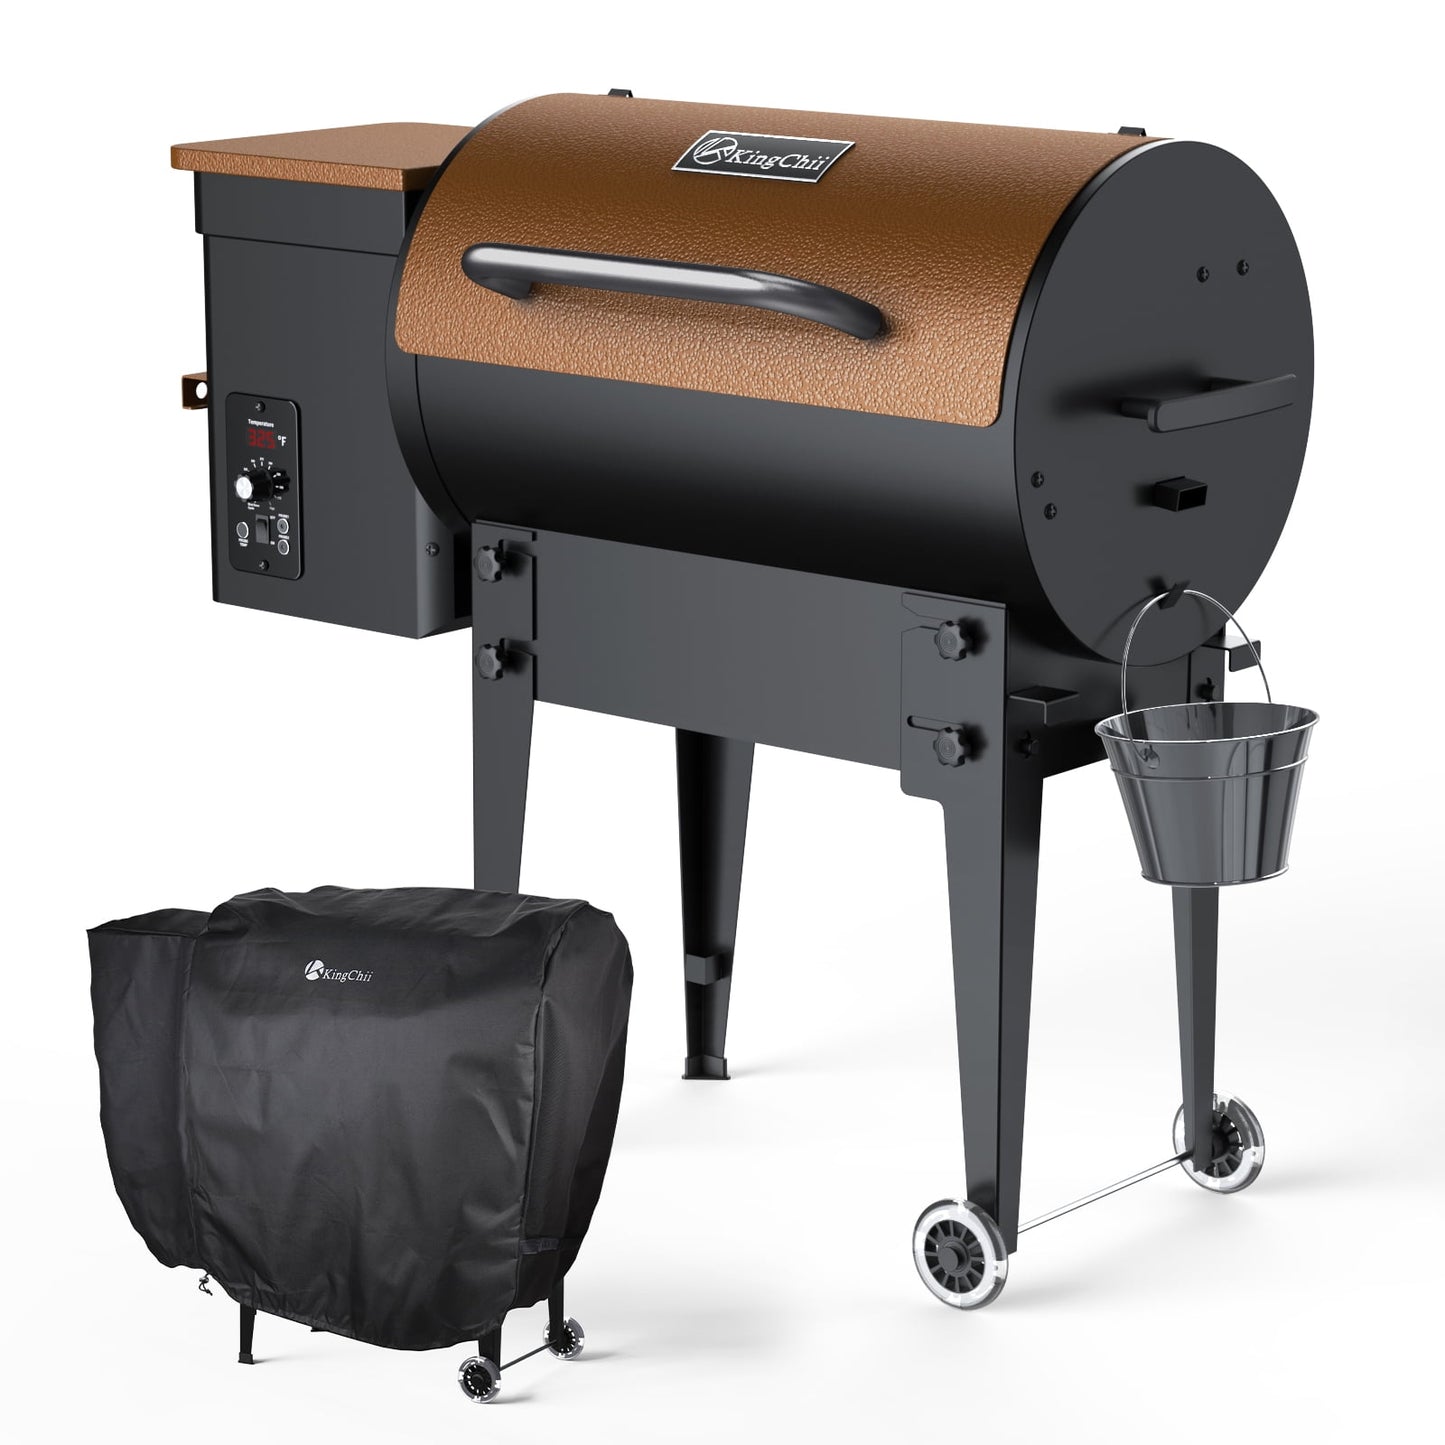 KingChii 456 sq. in Wood Pellet Smoker & Grill BBQ with Auto Temperature Controls, Folding Legs for Outdoor Patio RV (Rain Cover Included)